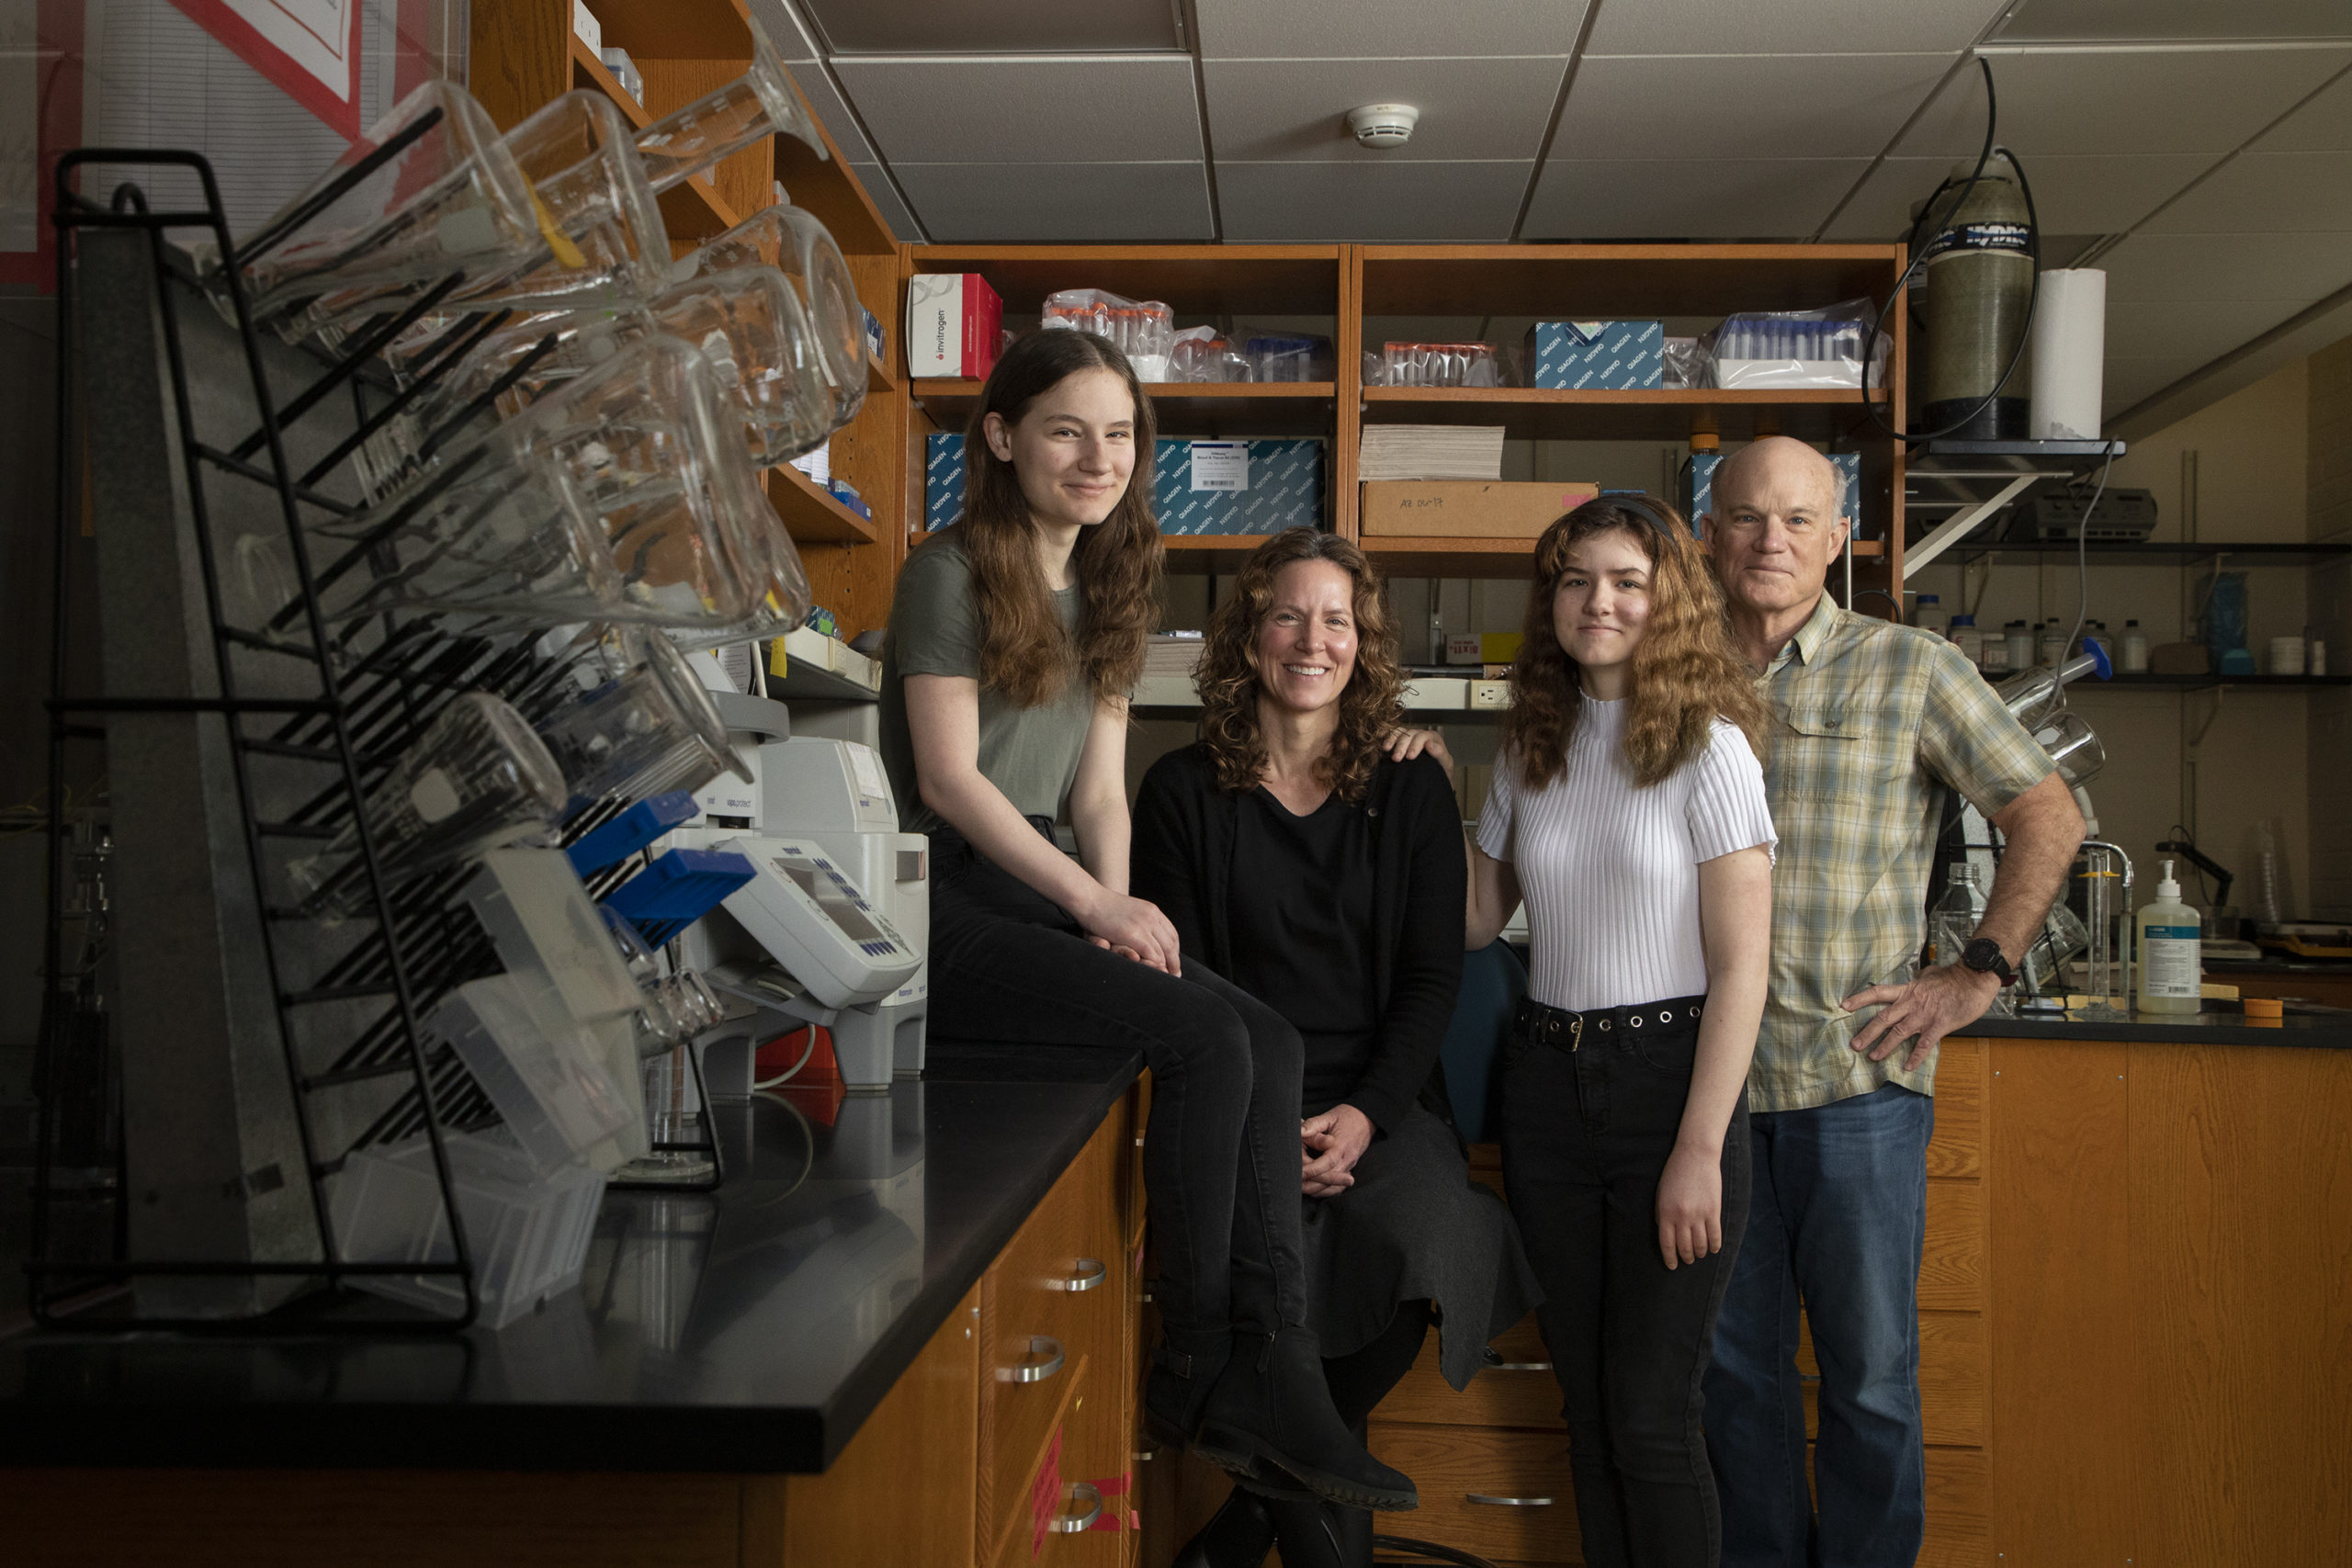 A mother, father, and two daughters pose for a portrait inside a university laboratory space.